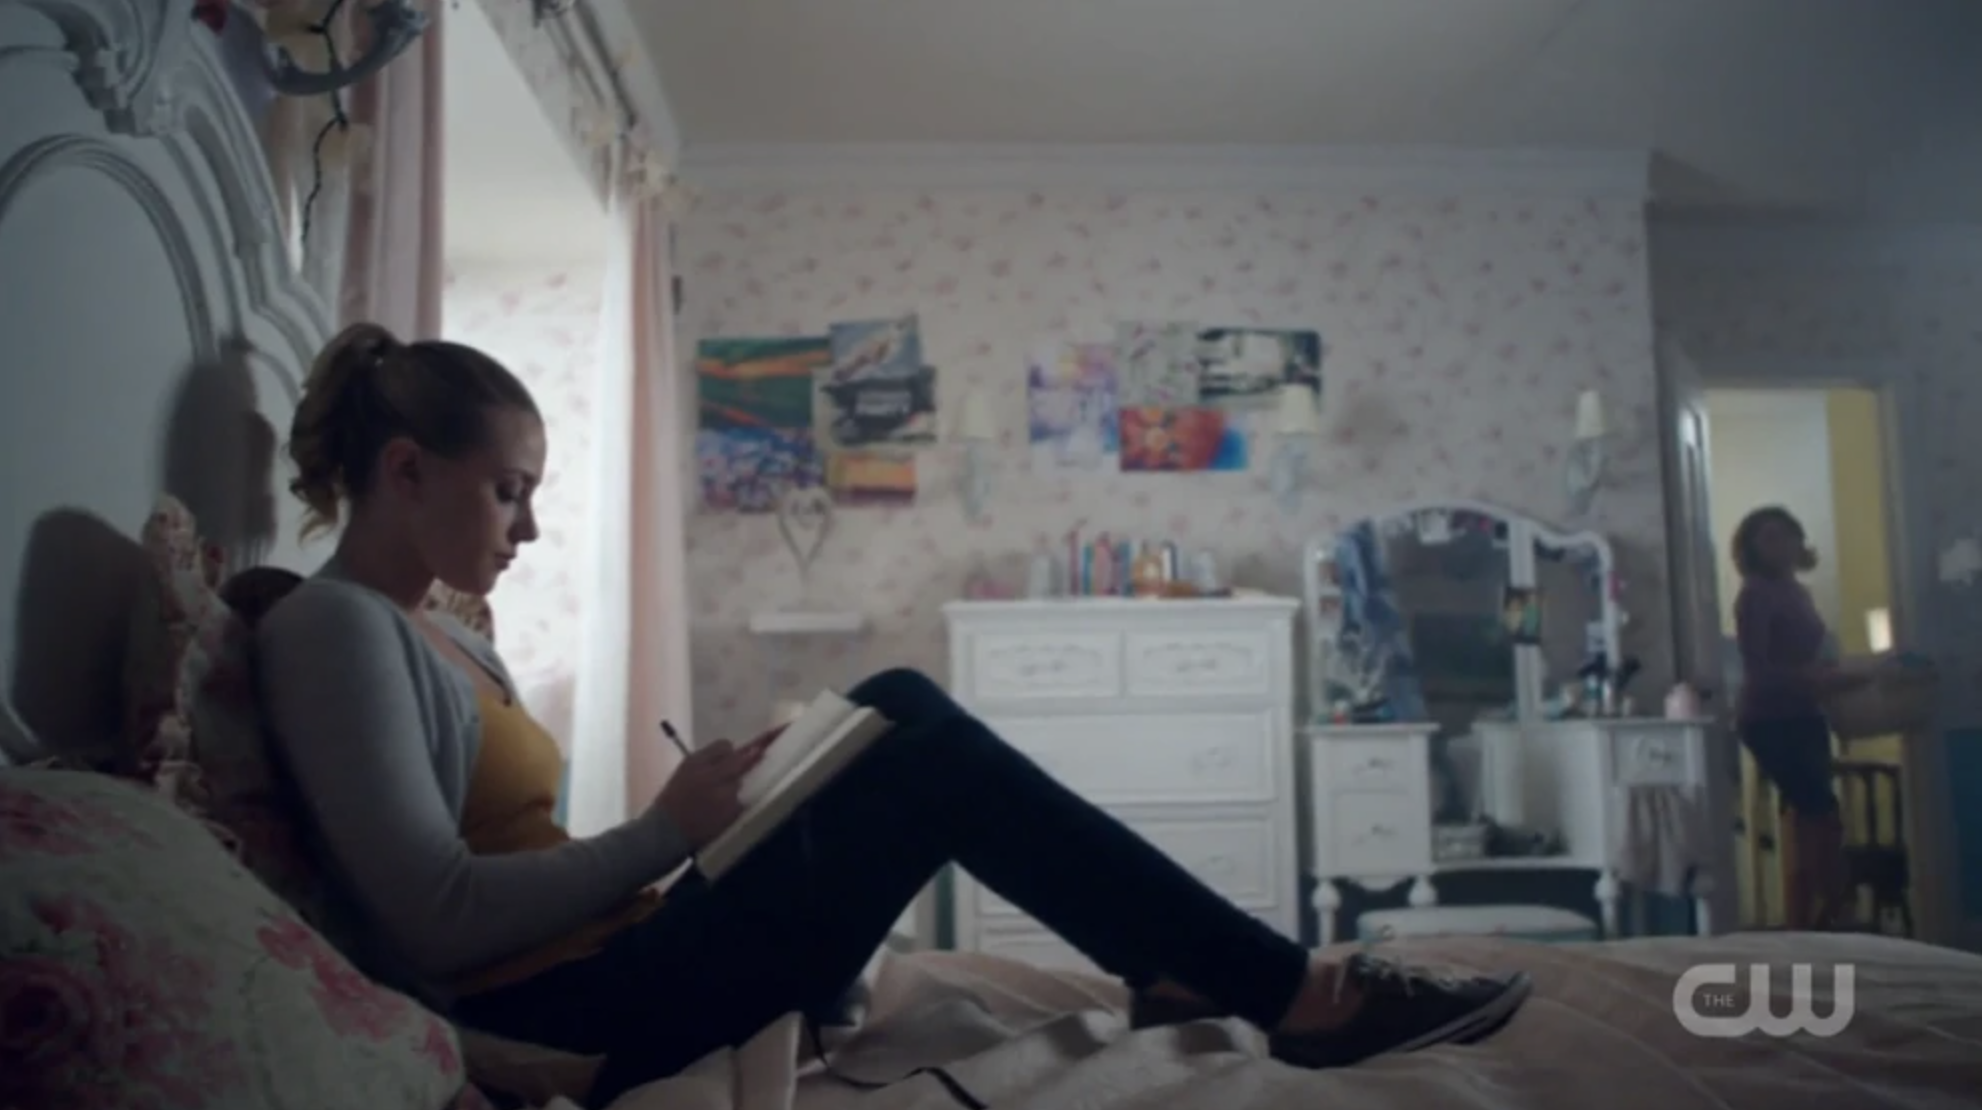 A character lying in bed and writing in her journal while wearing shoes